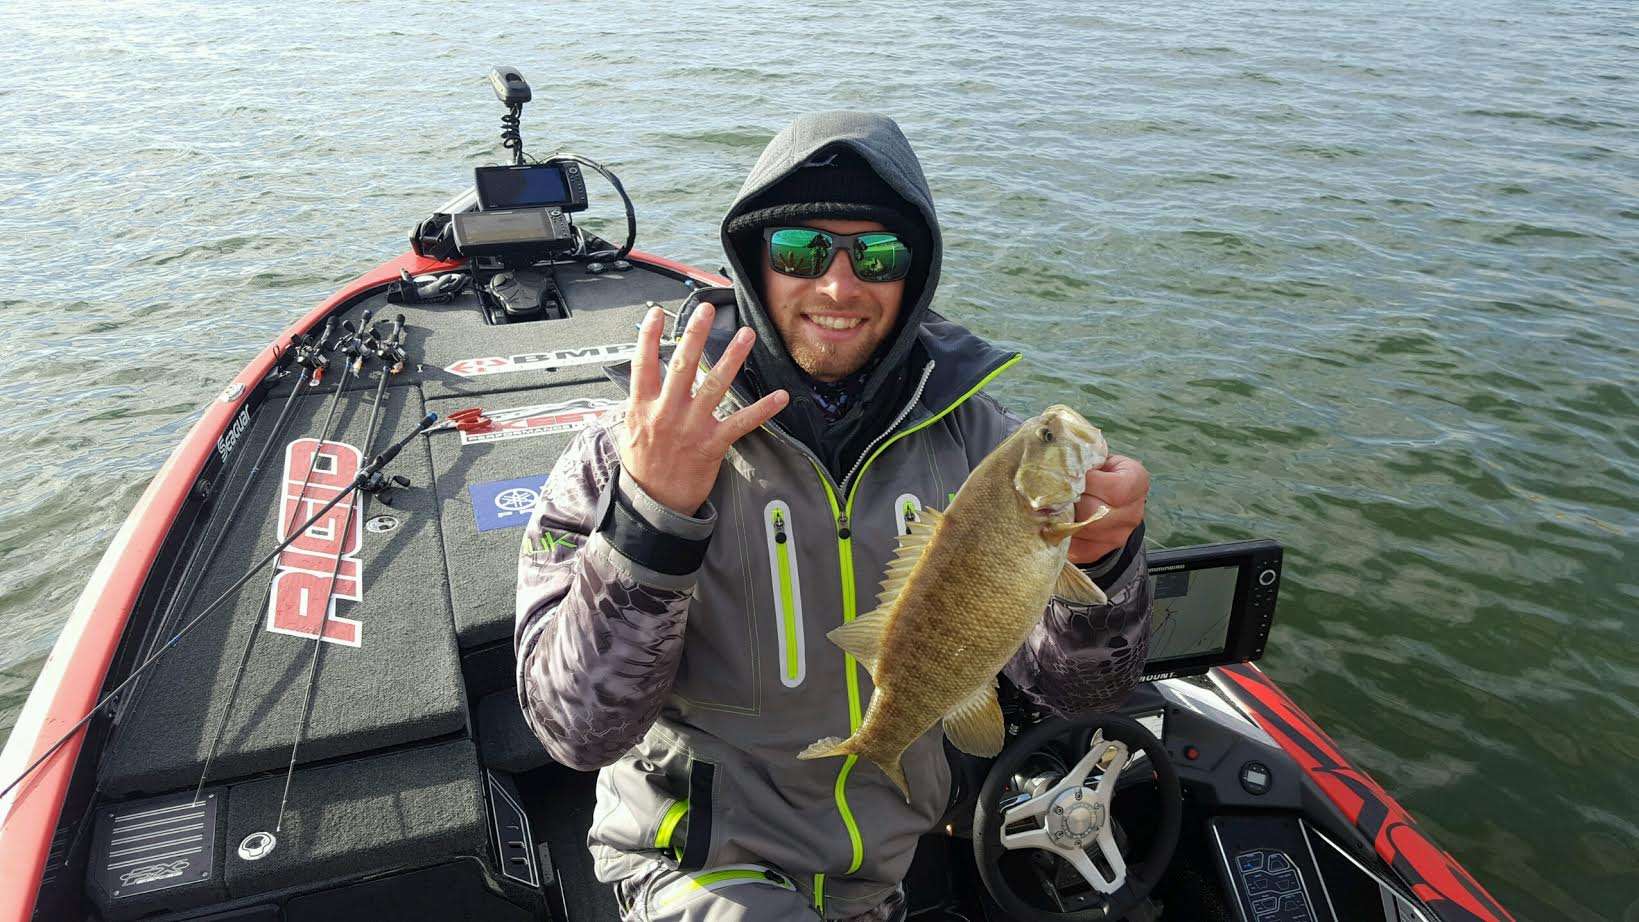 No. 4 is another smallmouth for Brandon Palaniuk. Now he's on the hunt for No. 5.

